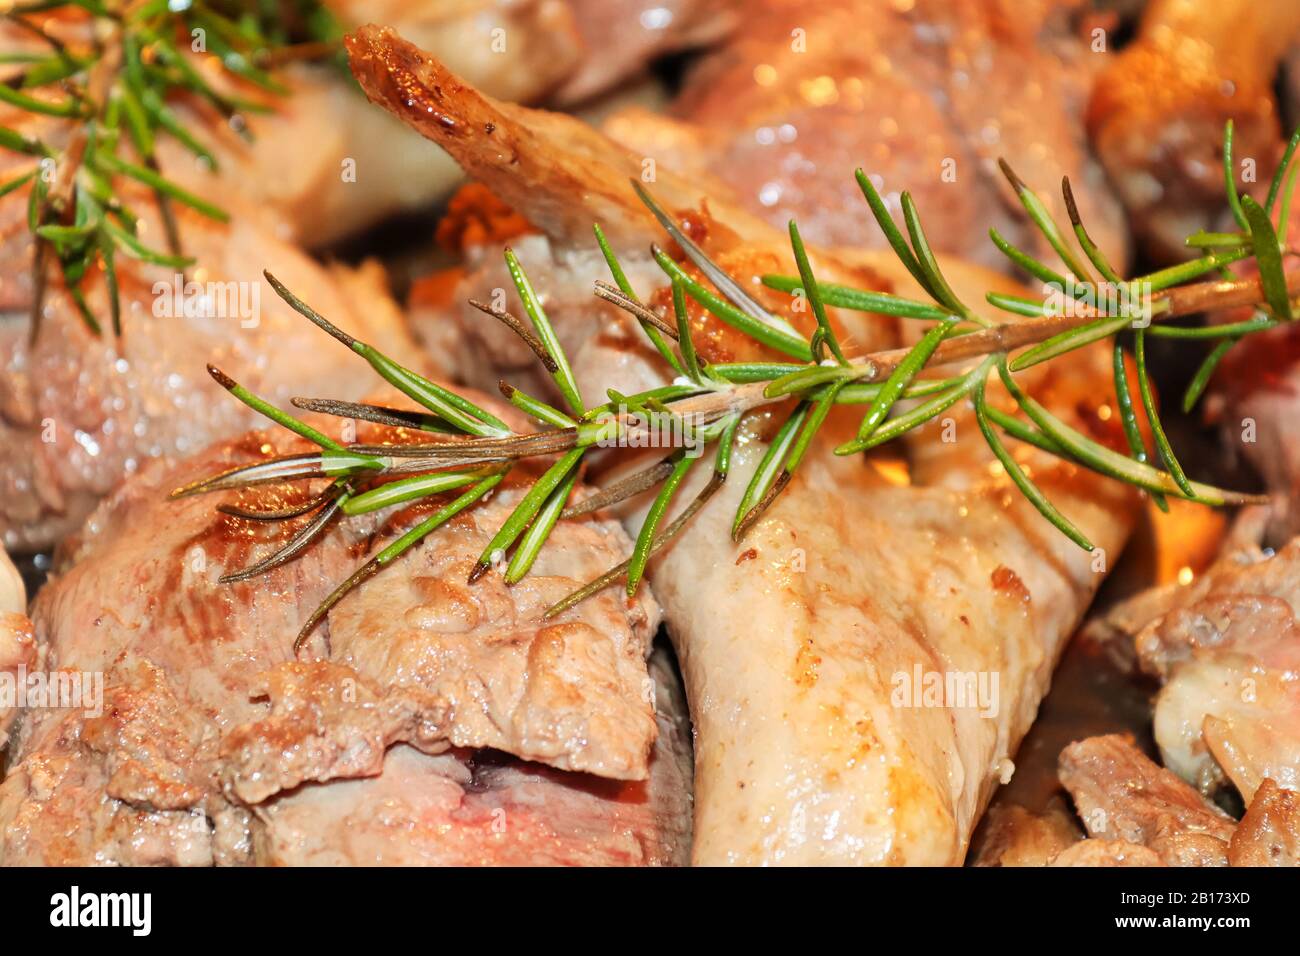 Closeup of rosemary over cut up duck pieces Stock Photo